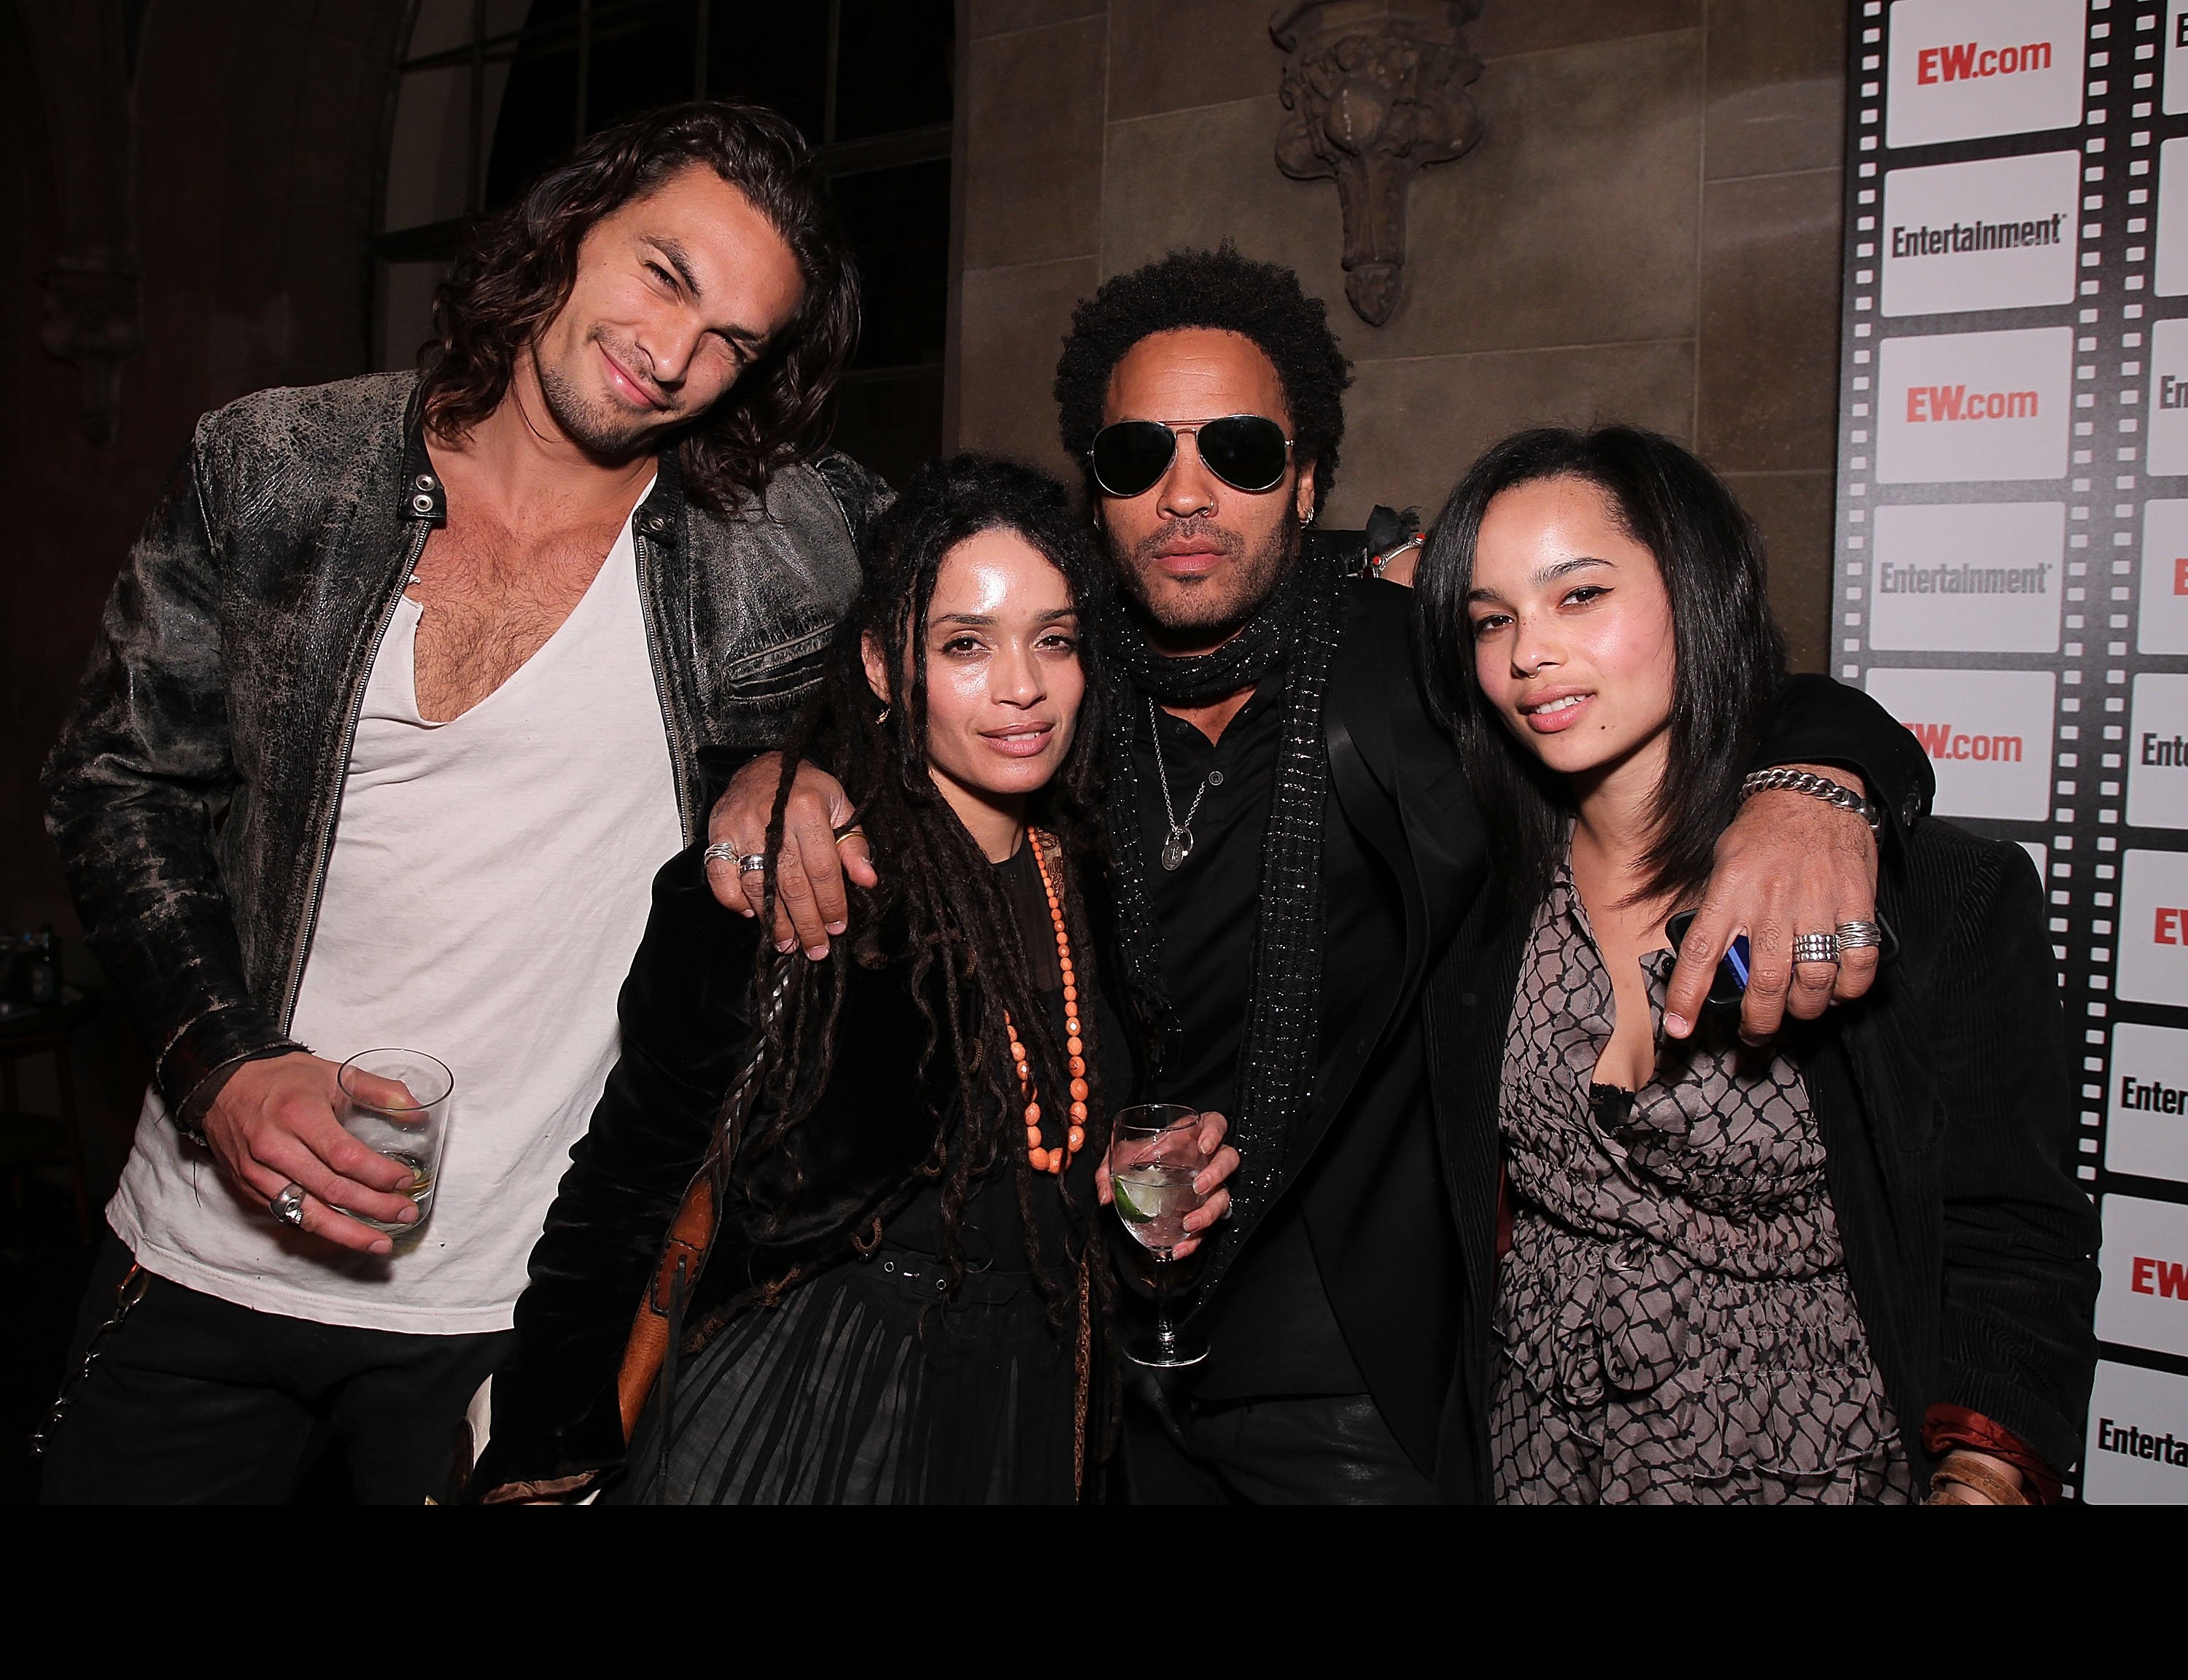 Jason Momoa, Lisa Bonet, Lenny Kravitz and Zoe Kravitz at Entertainment Weekly's party held at Chateau Marmont on February 25, 2010 in Los Angeles, California. / Source: Getty Images